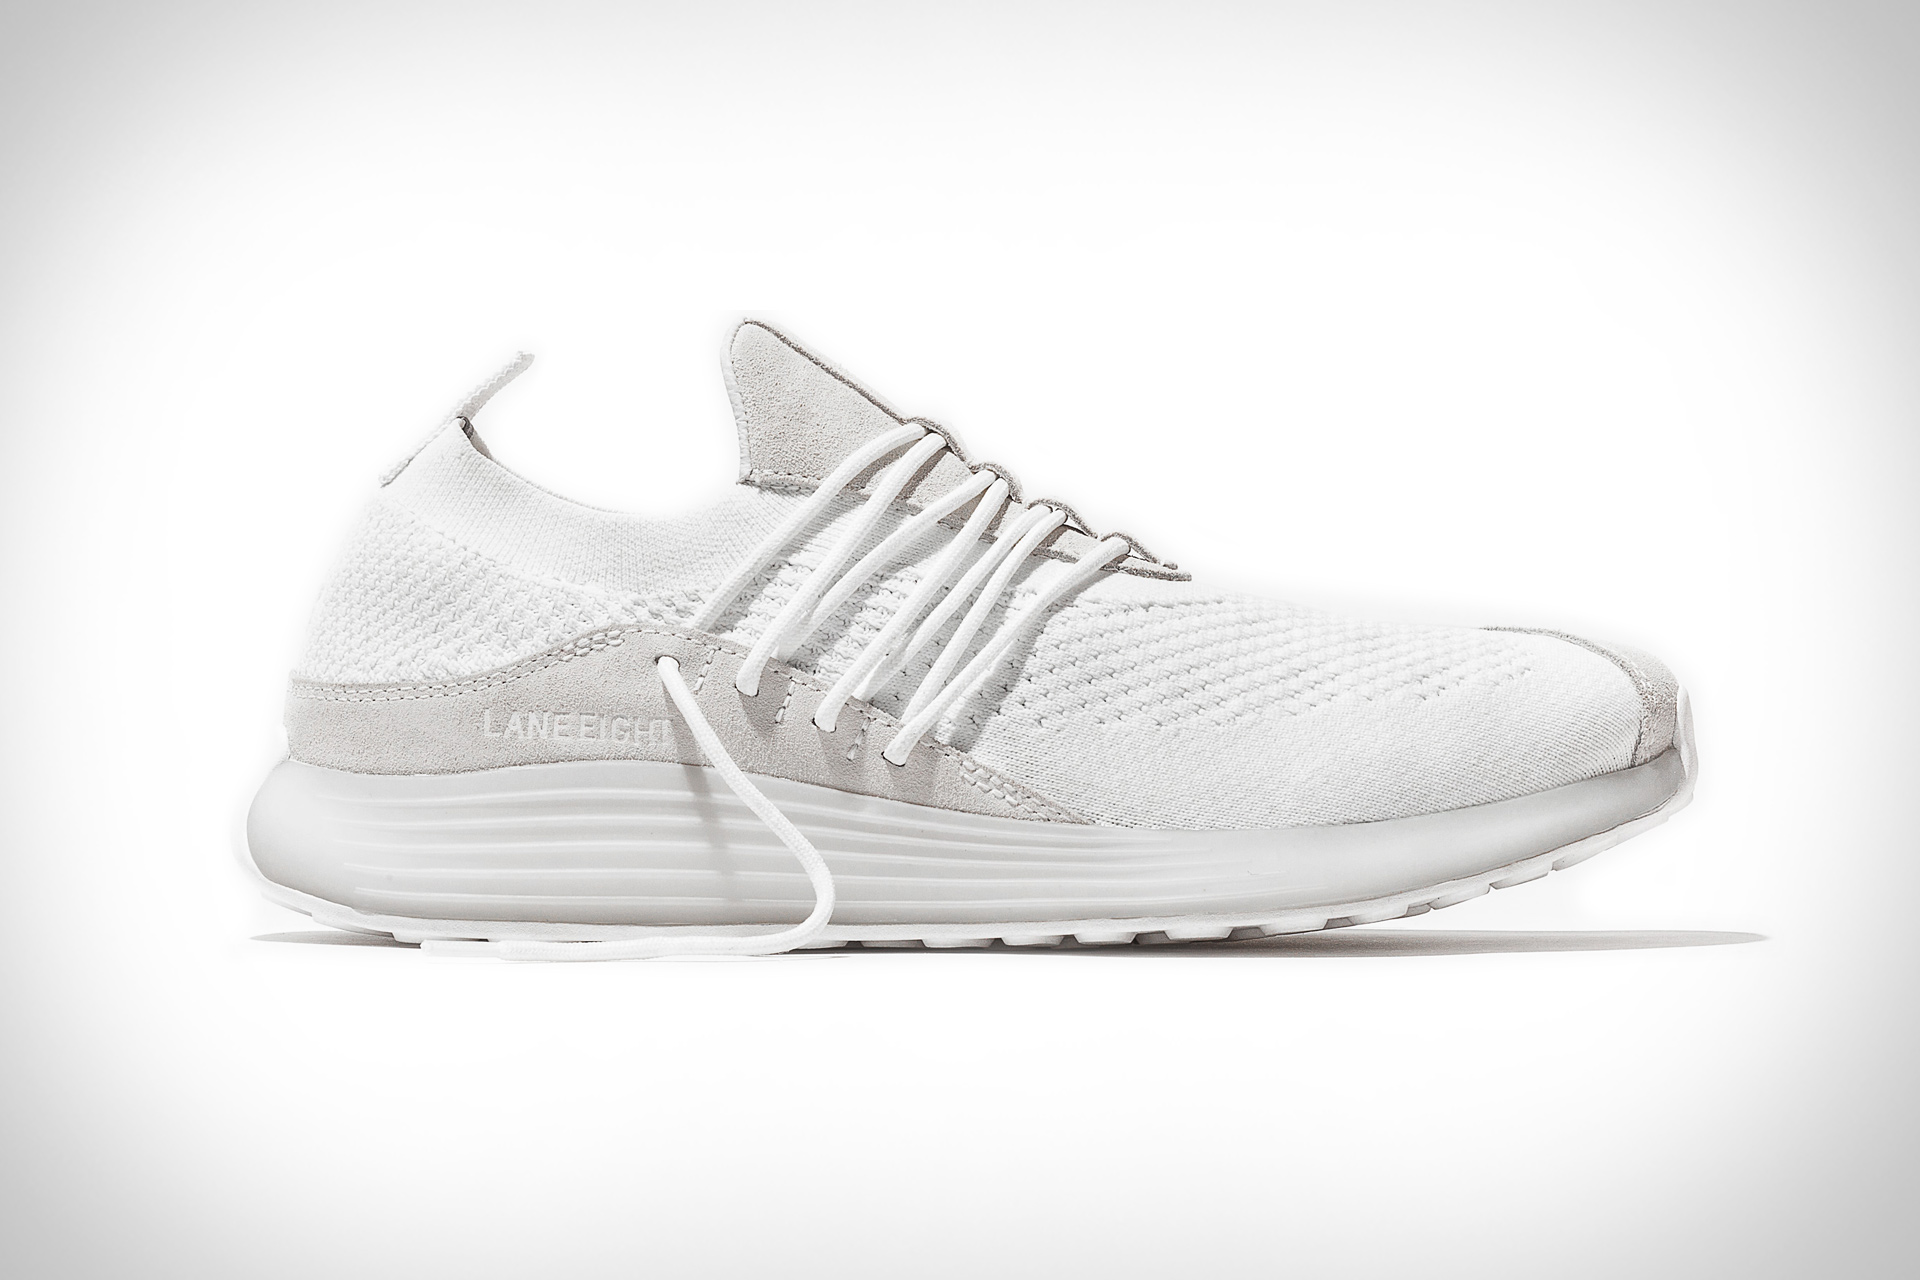 Lane Eight Trainer AD 1 Shoe | Uncrate